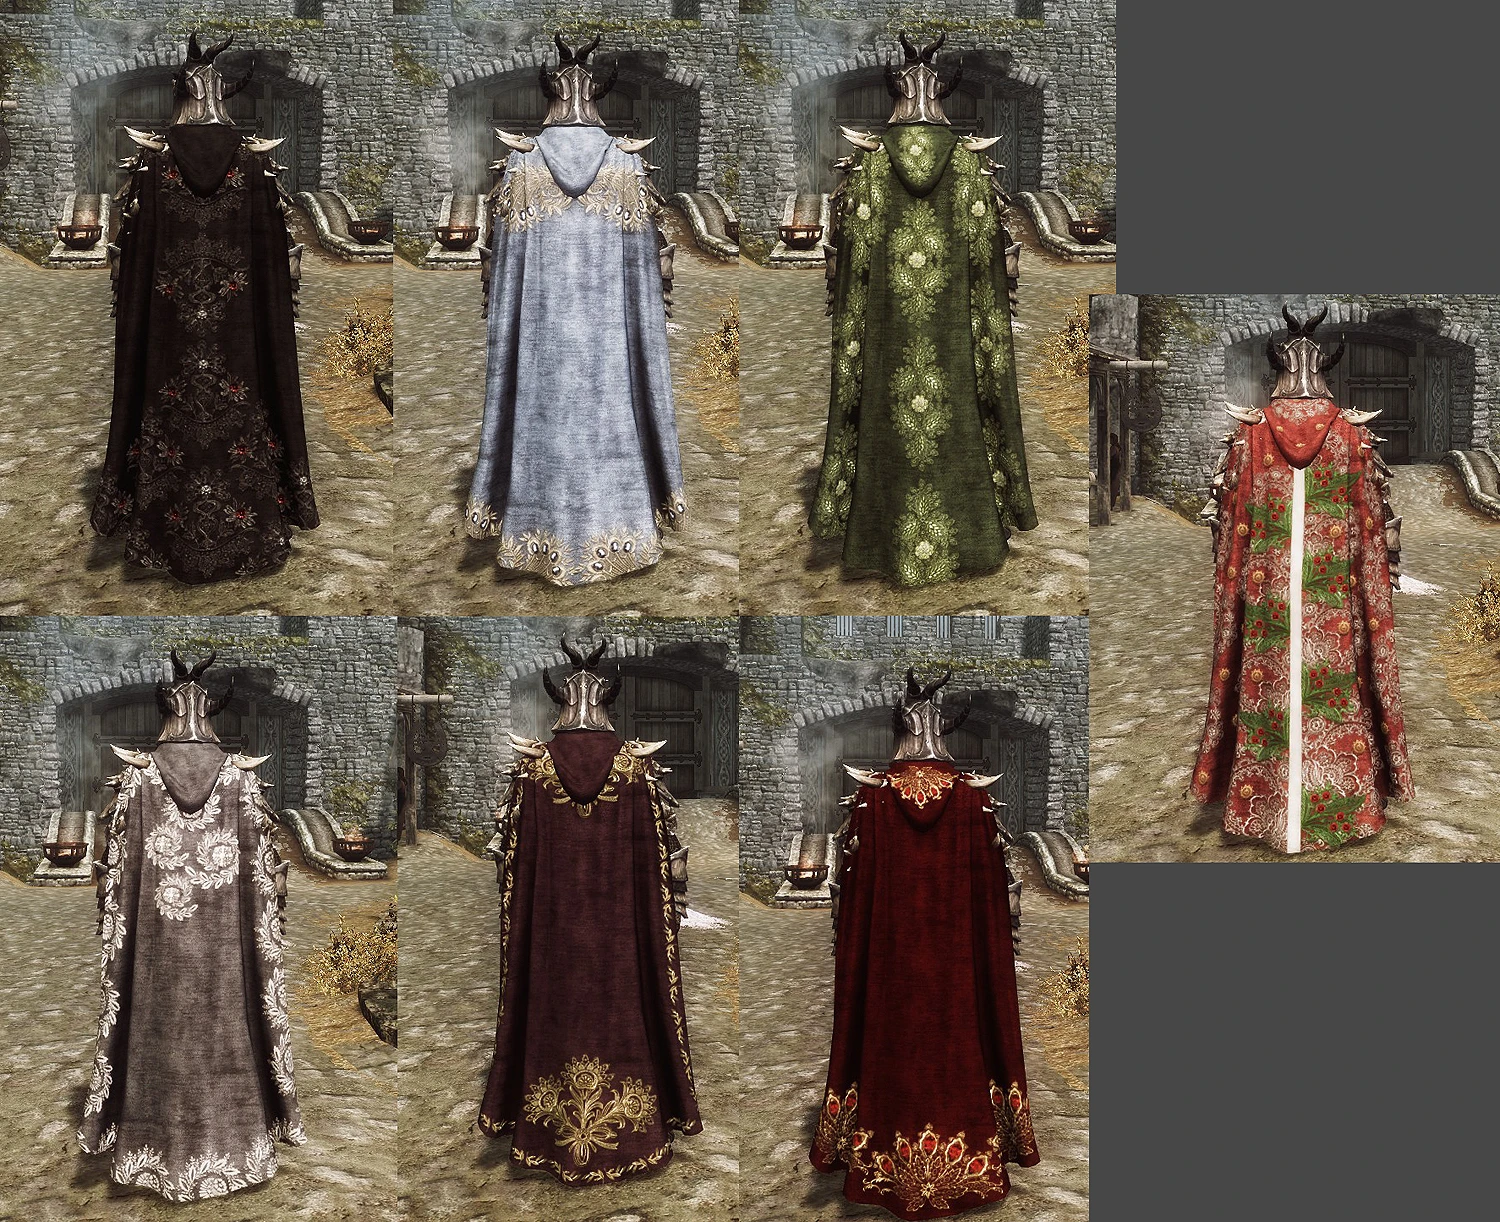 cloaks of skyrim or cloaks and capes